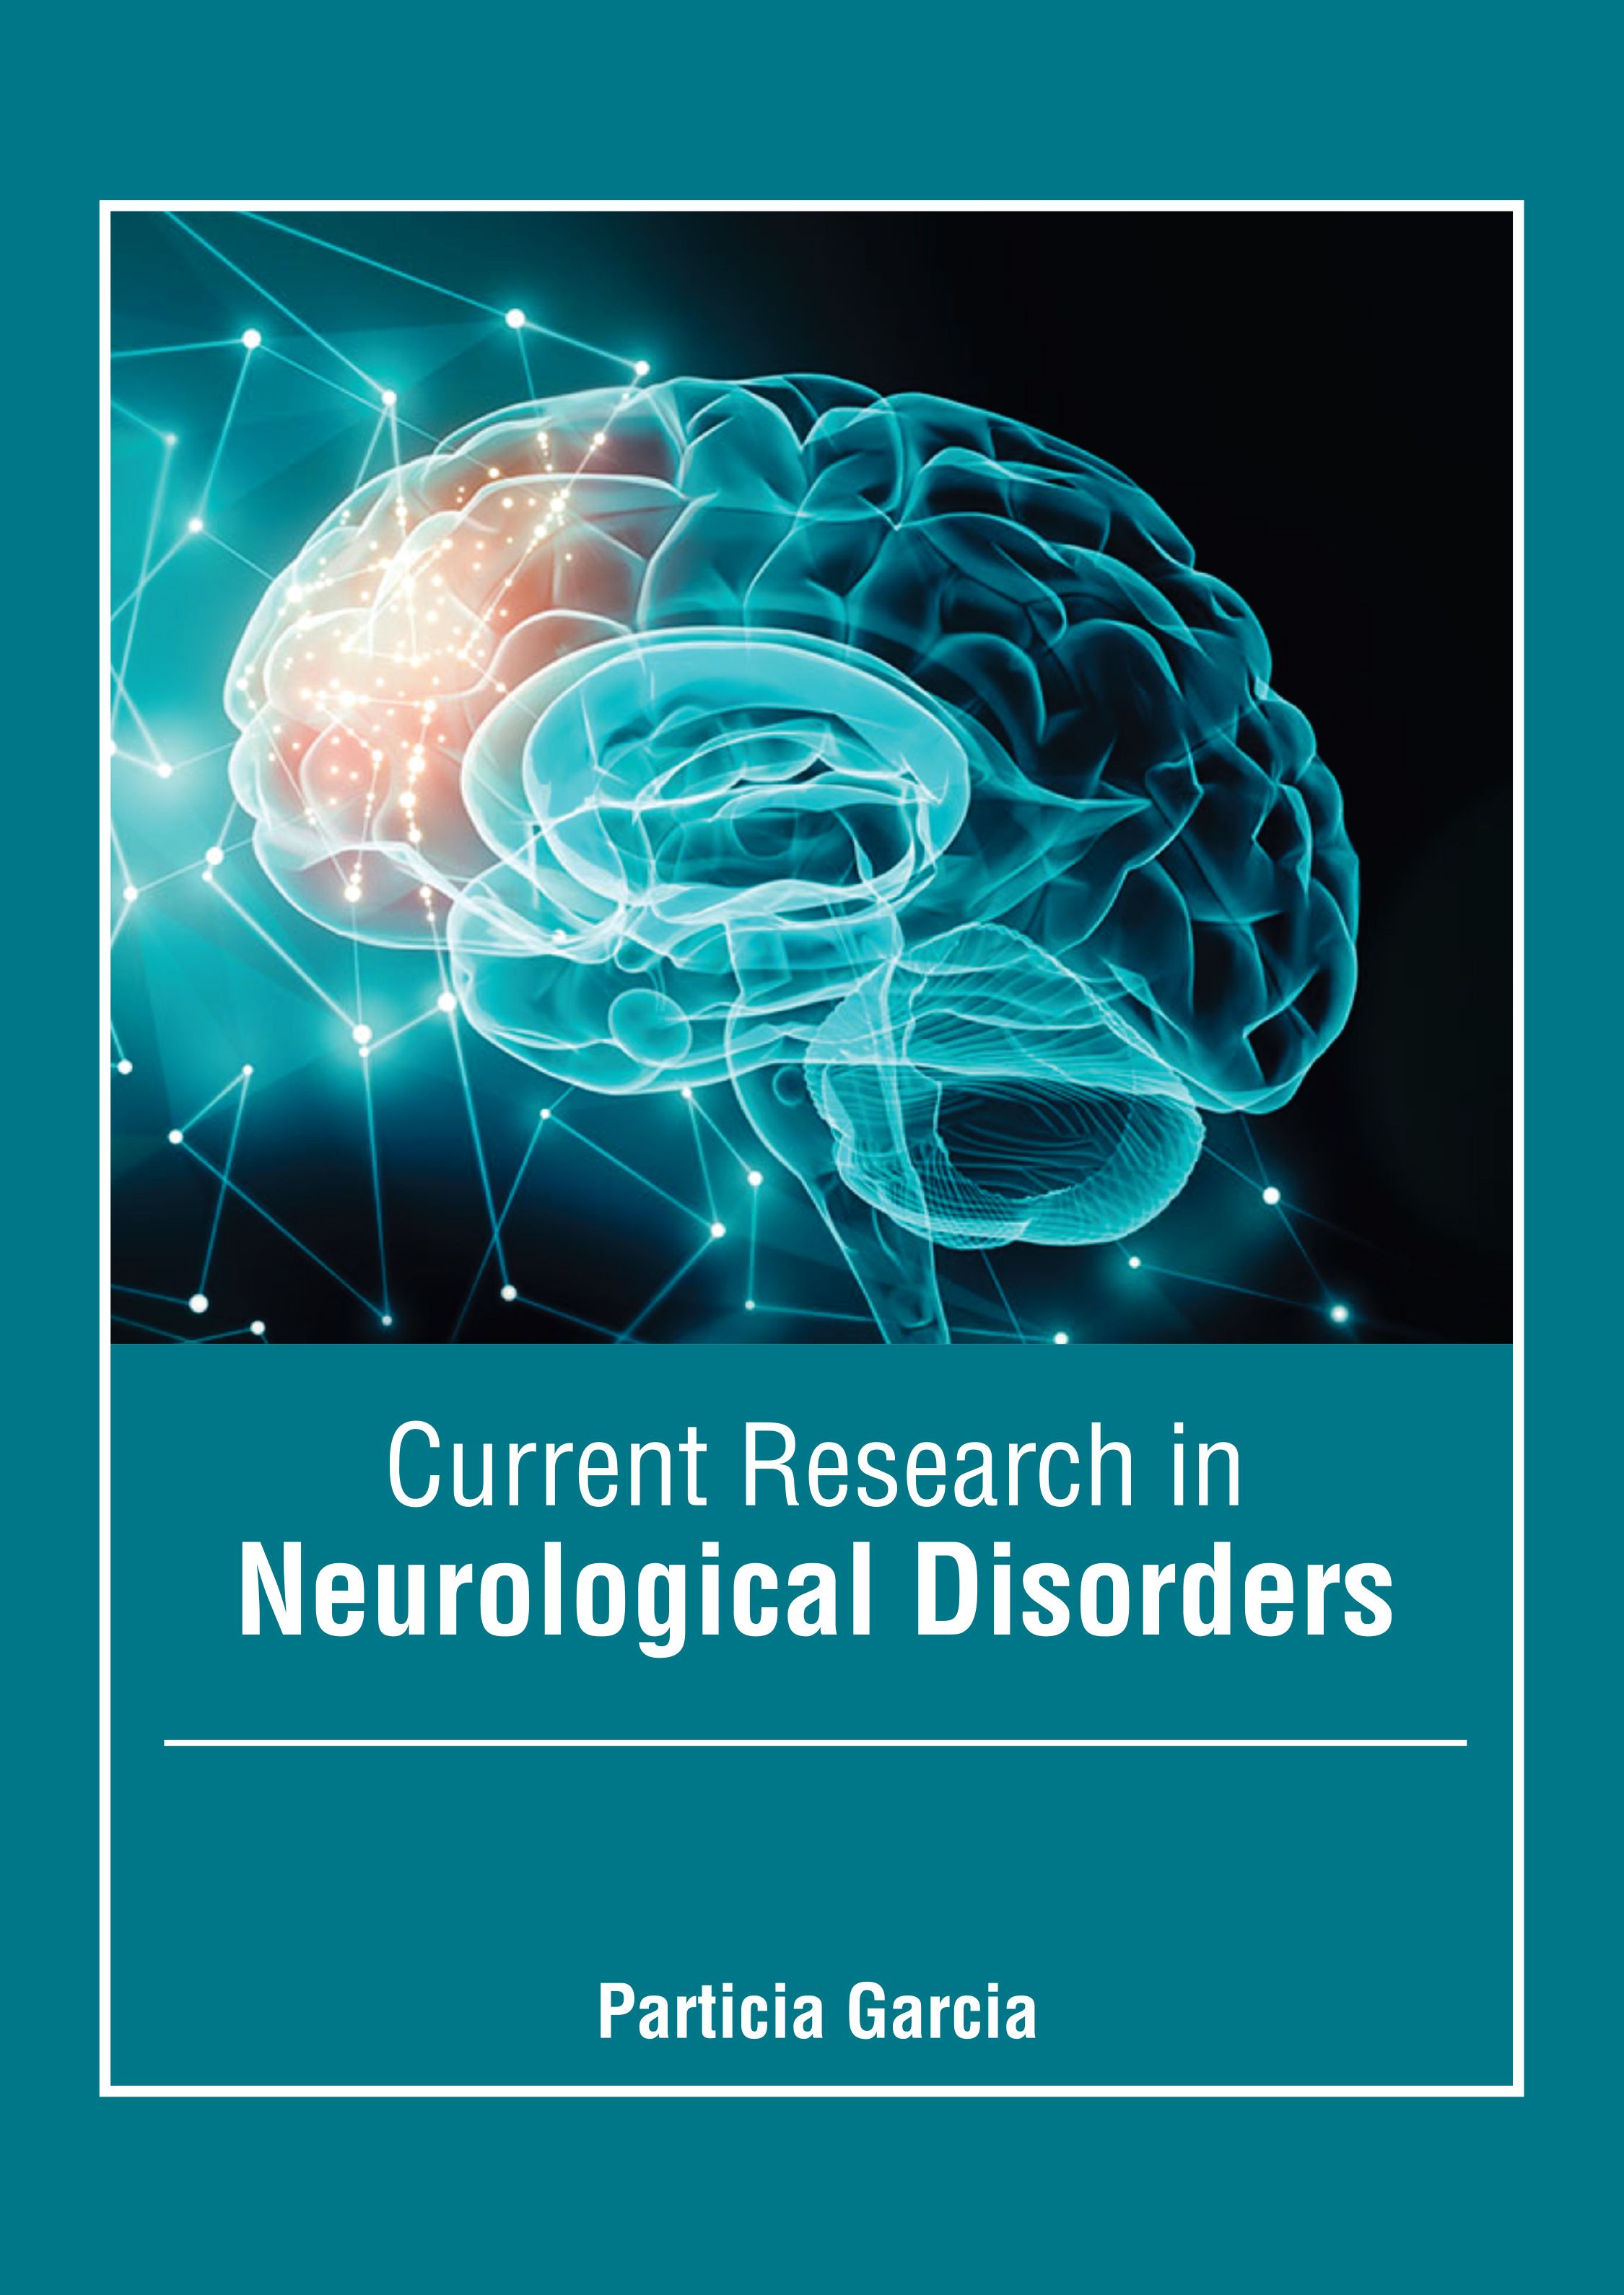 CURRENT RESEARCH IN NEUROLOGICAL DISORDERS